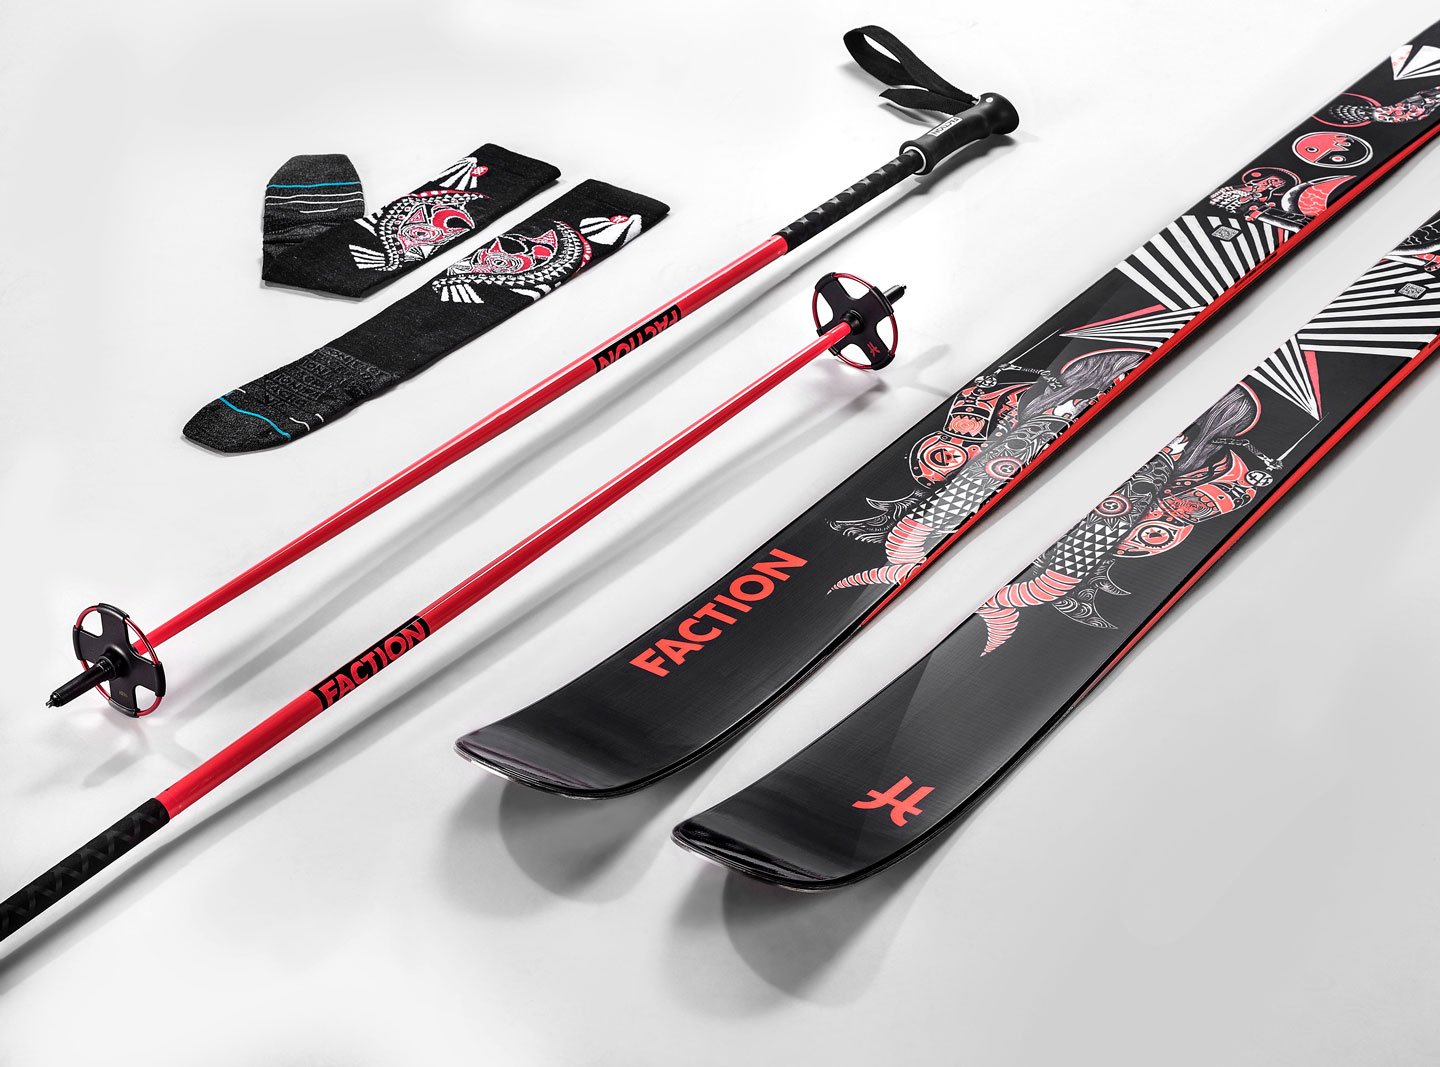 Kengo X Faction Skis X Stance Socks Collab